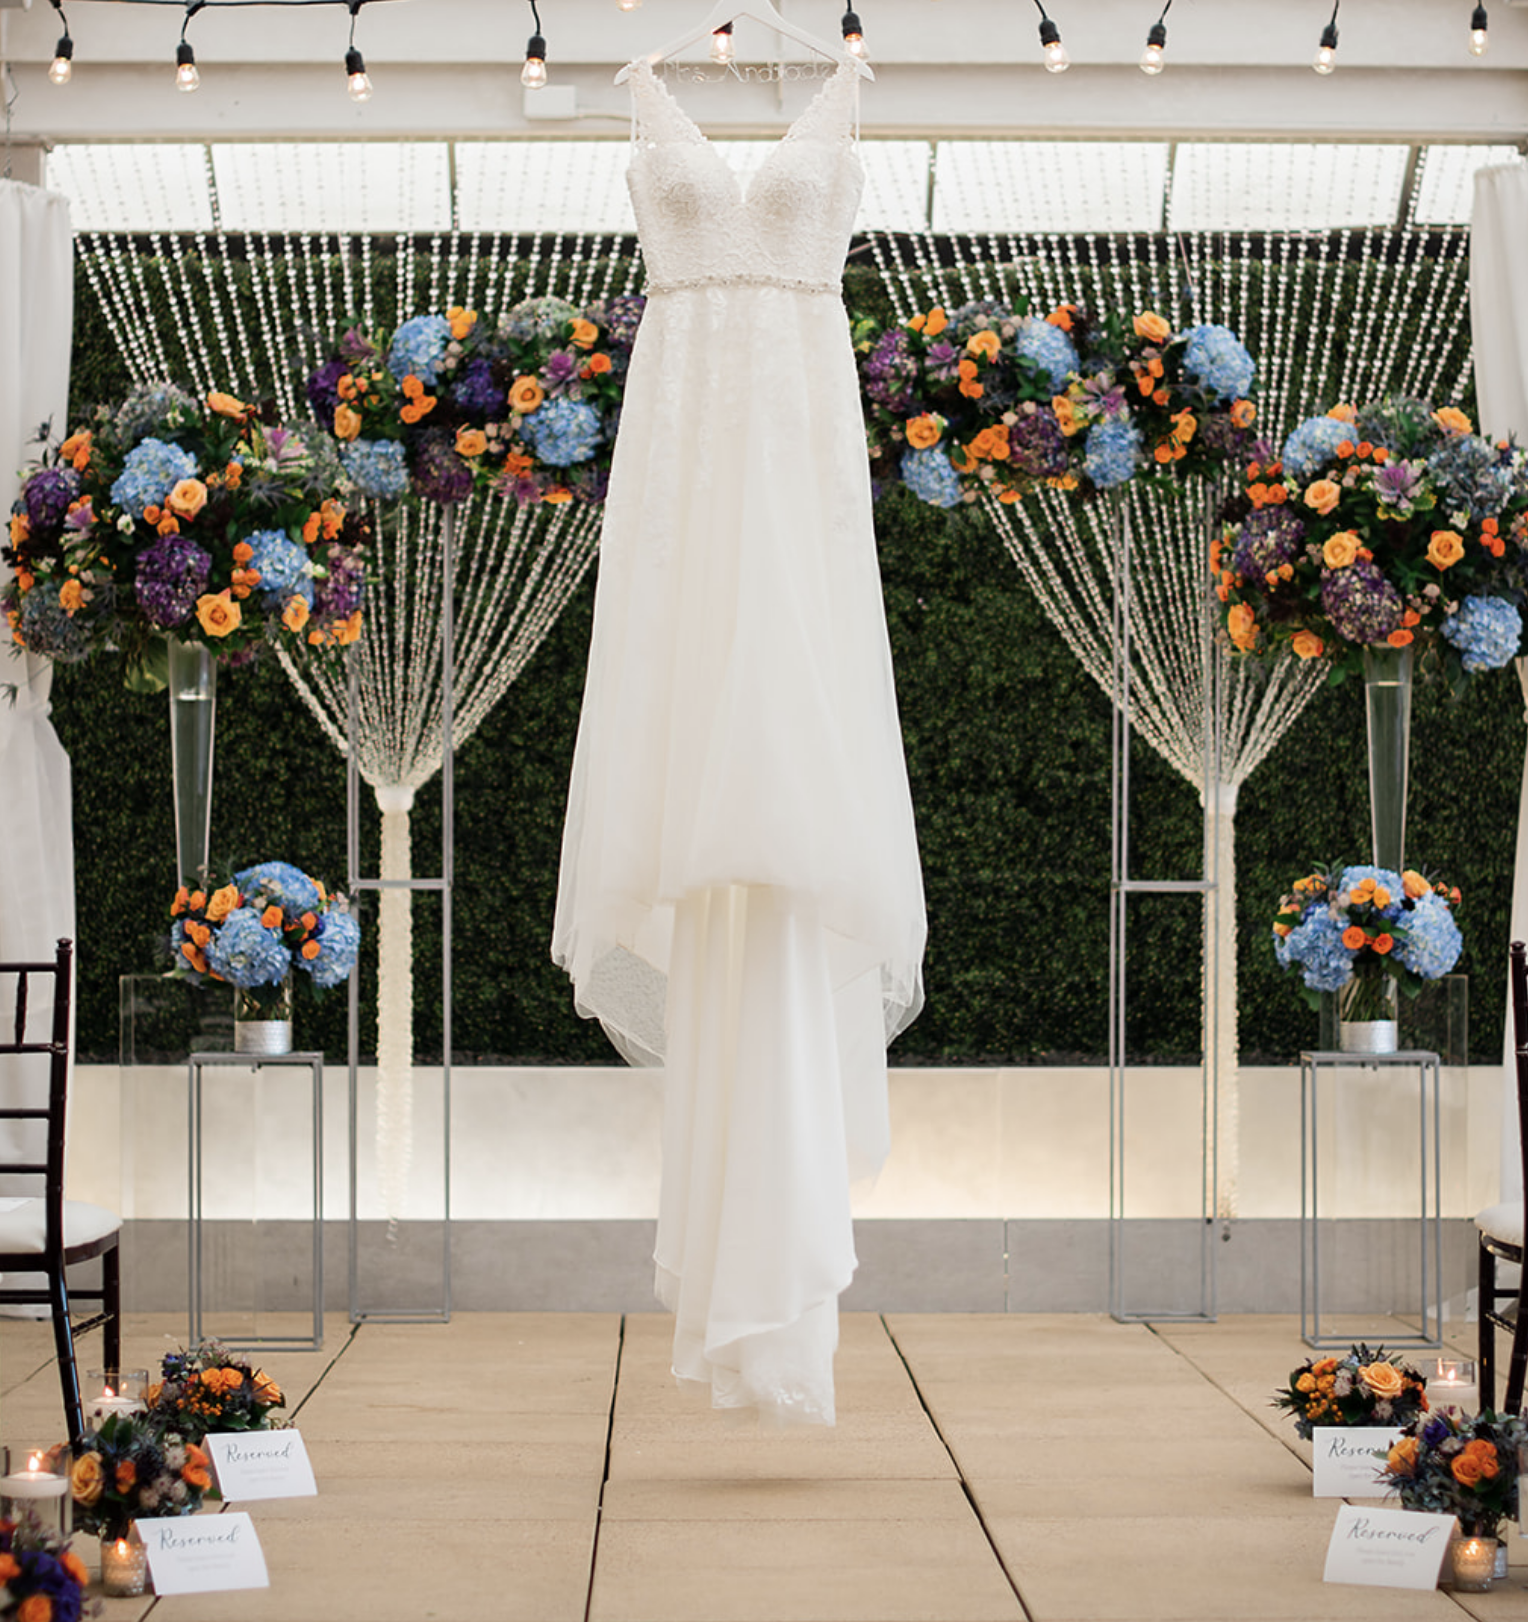 The bride's wedding dress hangs in the front of the altar, which is decorated for the whimsical jewel-toned wedding.